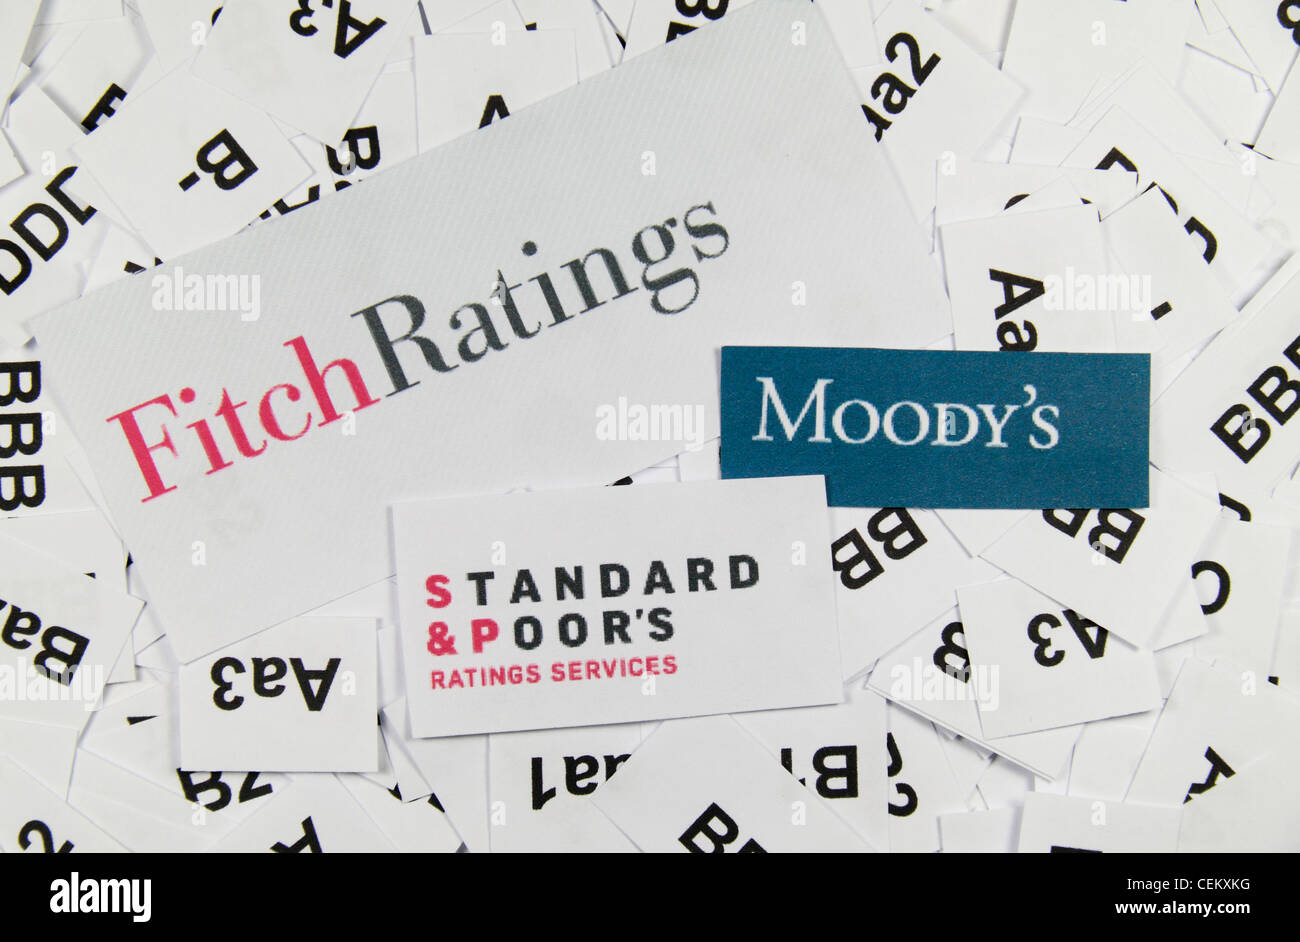 The logos of Fitch Ratings, Moody's and Standard & Poor's, on a bed of the credit ratings used by them to evaluate corporations. Stock Photo